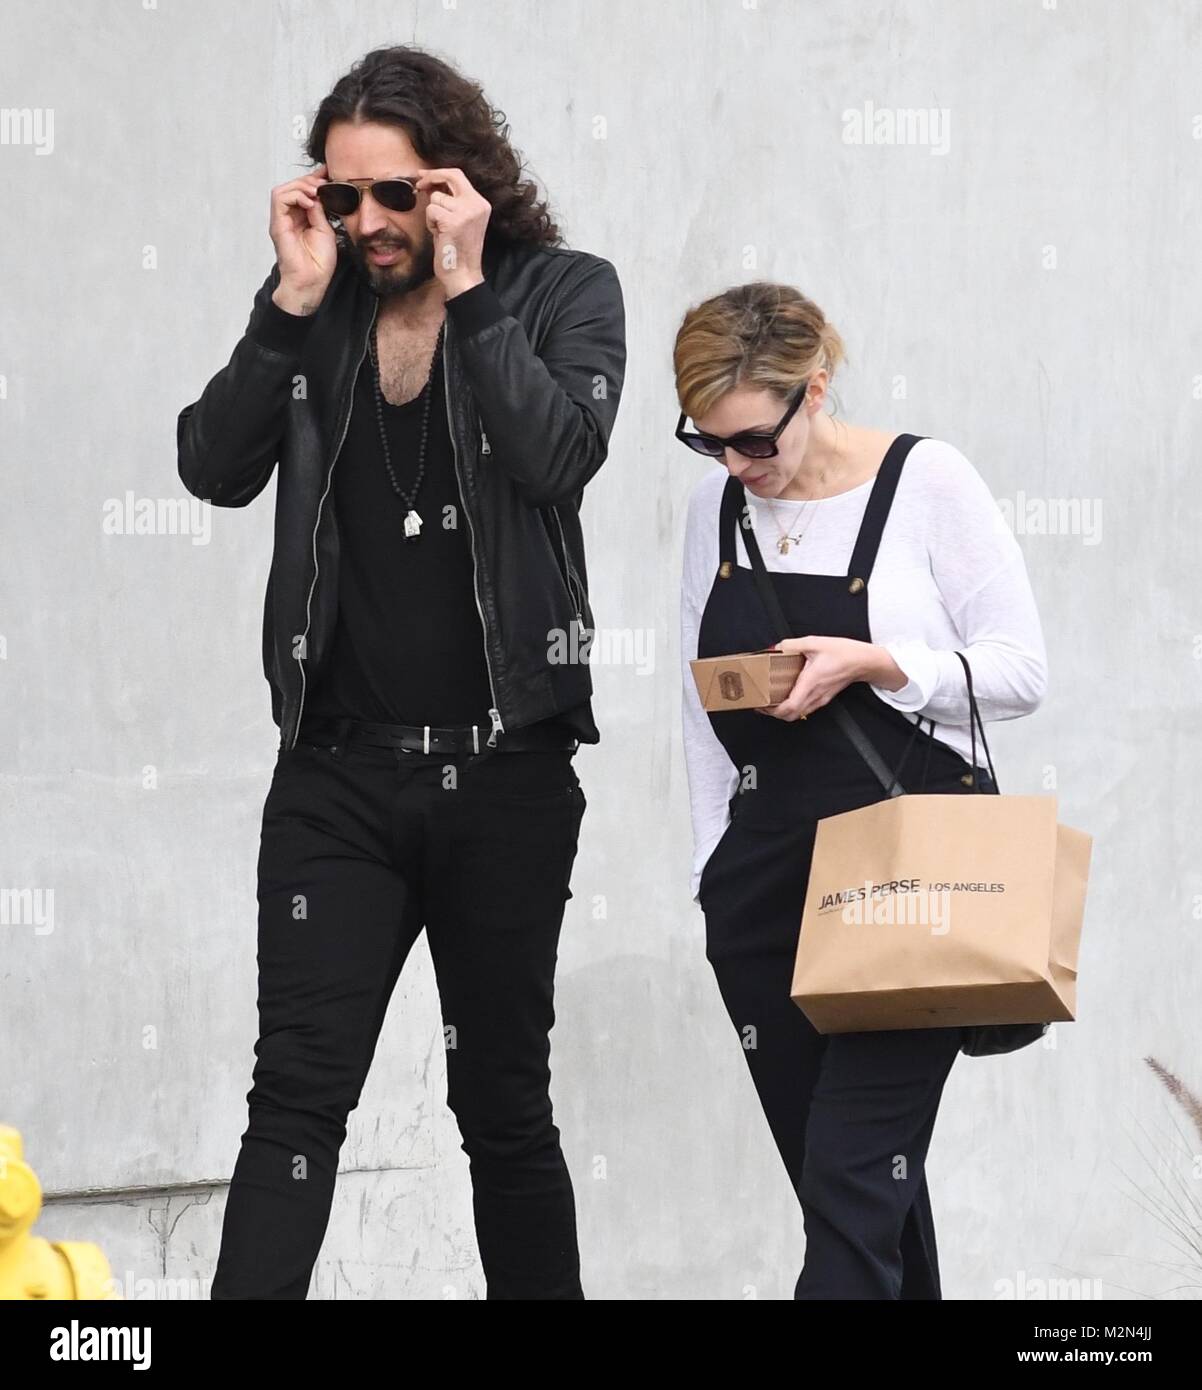 Russell Brand and his wife Laura leaving Gracias Madre in West Hollywood,  California. Featuring: Russell Brand, Laura Gallacher, Laura Brand Where:  West Hollywood, California, United States When: 07 Jan 2018 Credit: WENN.com